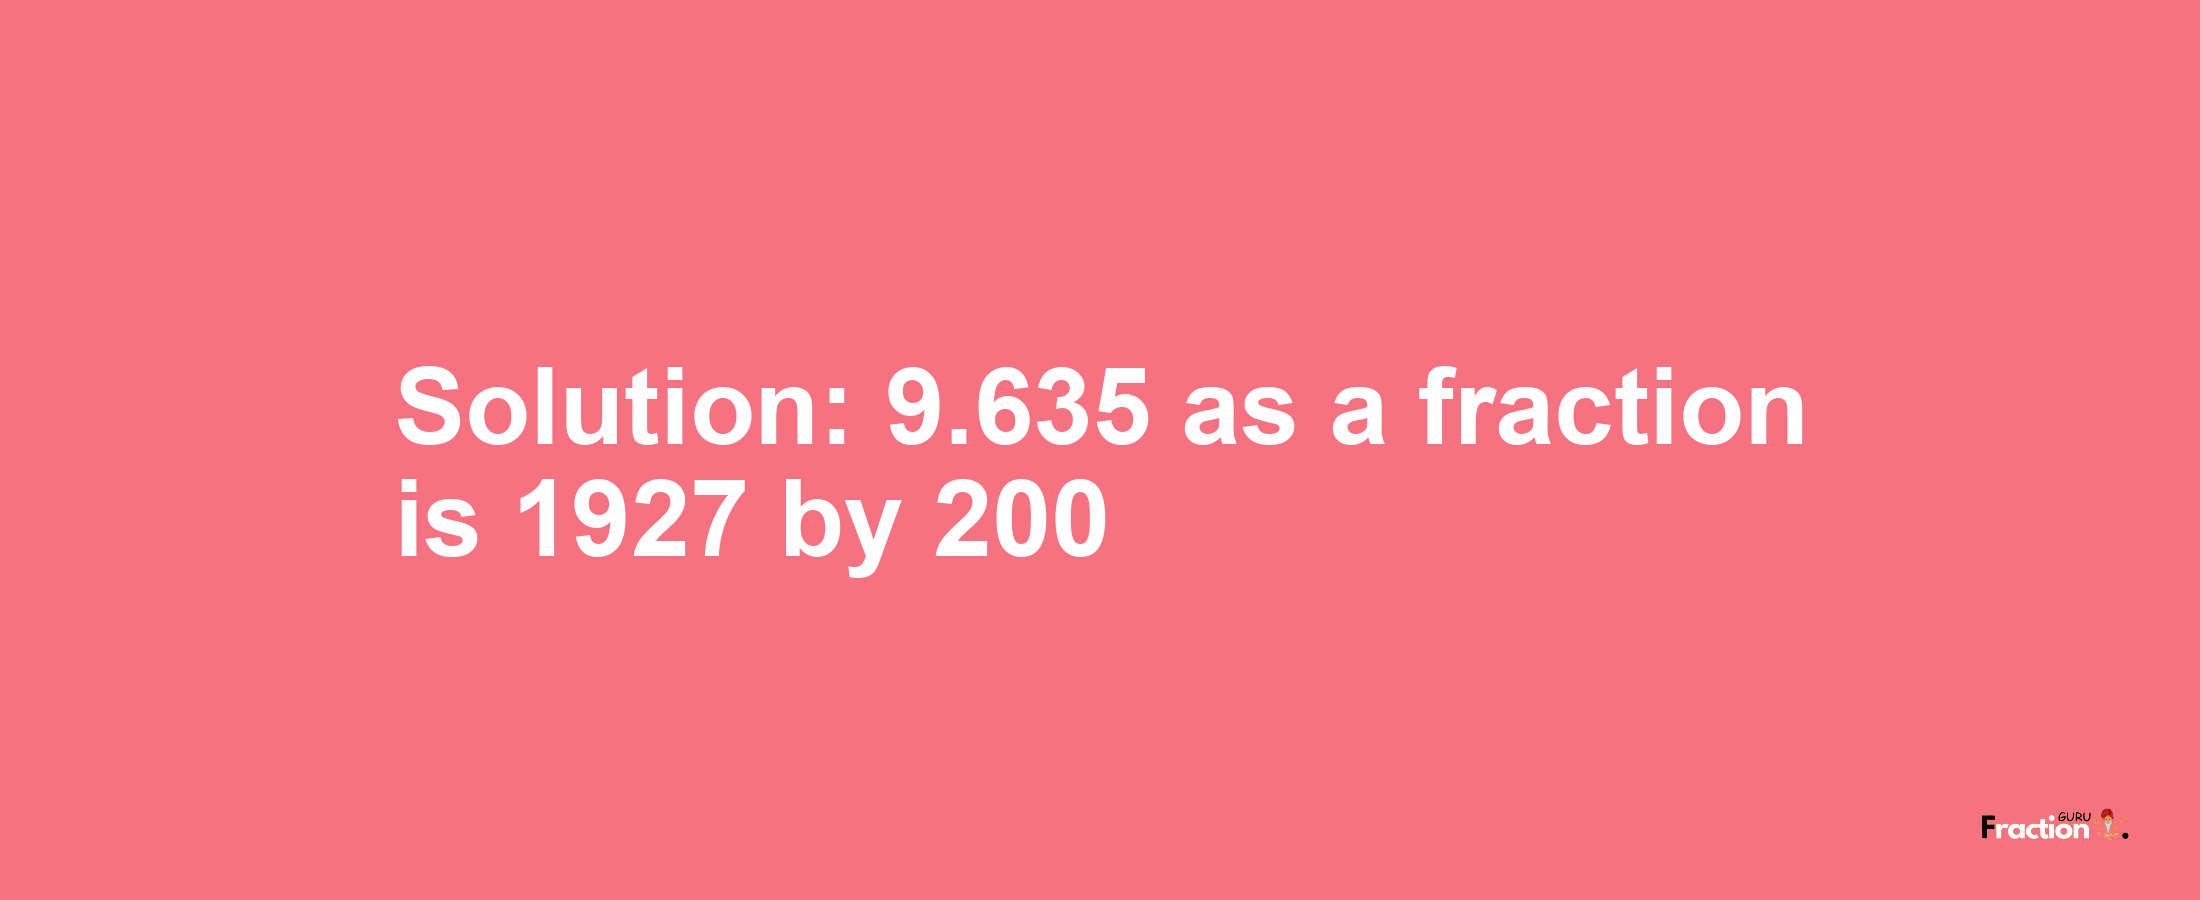 Solution:9.635 as a fraction is 1927/200